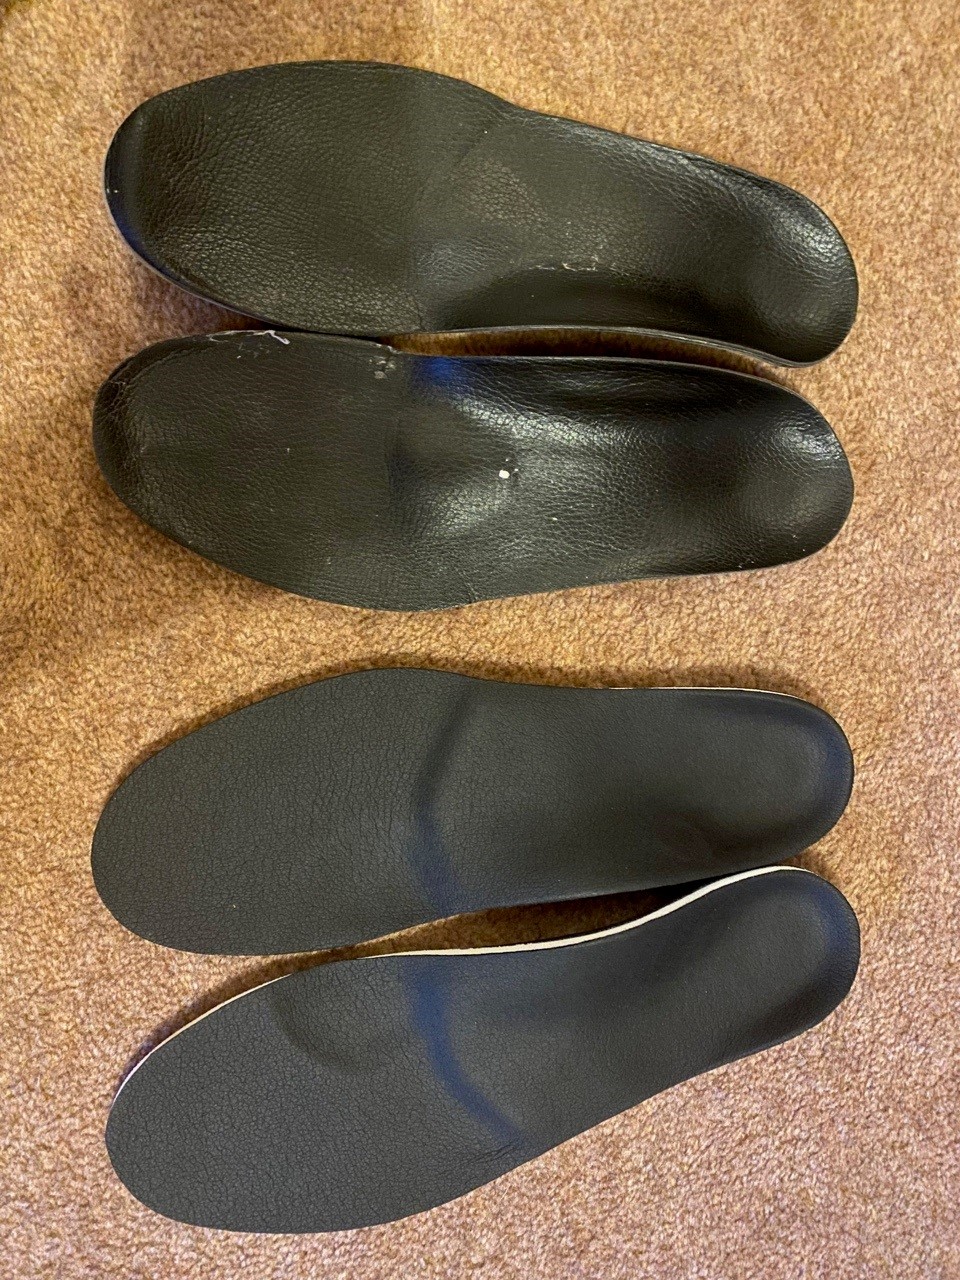 Will Tidball – “How I’m getting on with my Prescription Orthotics”